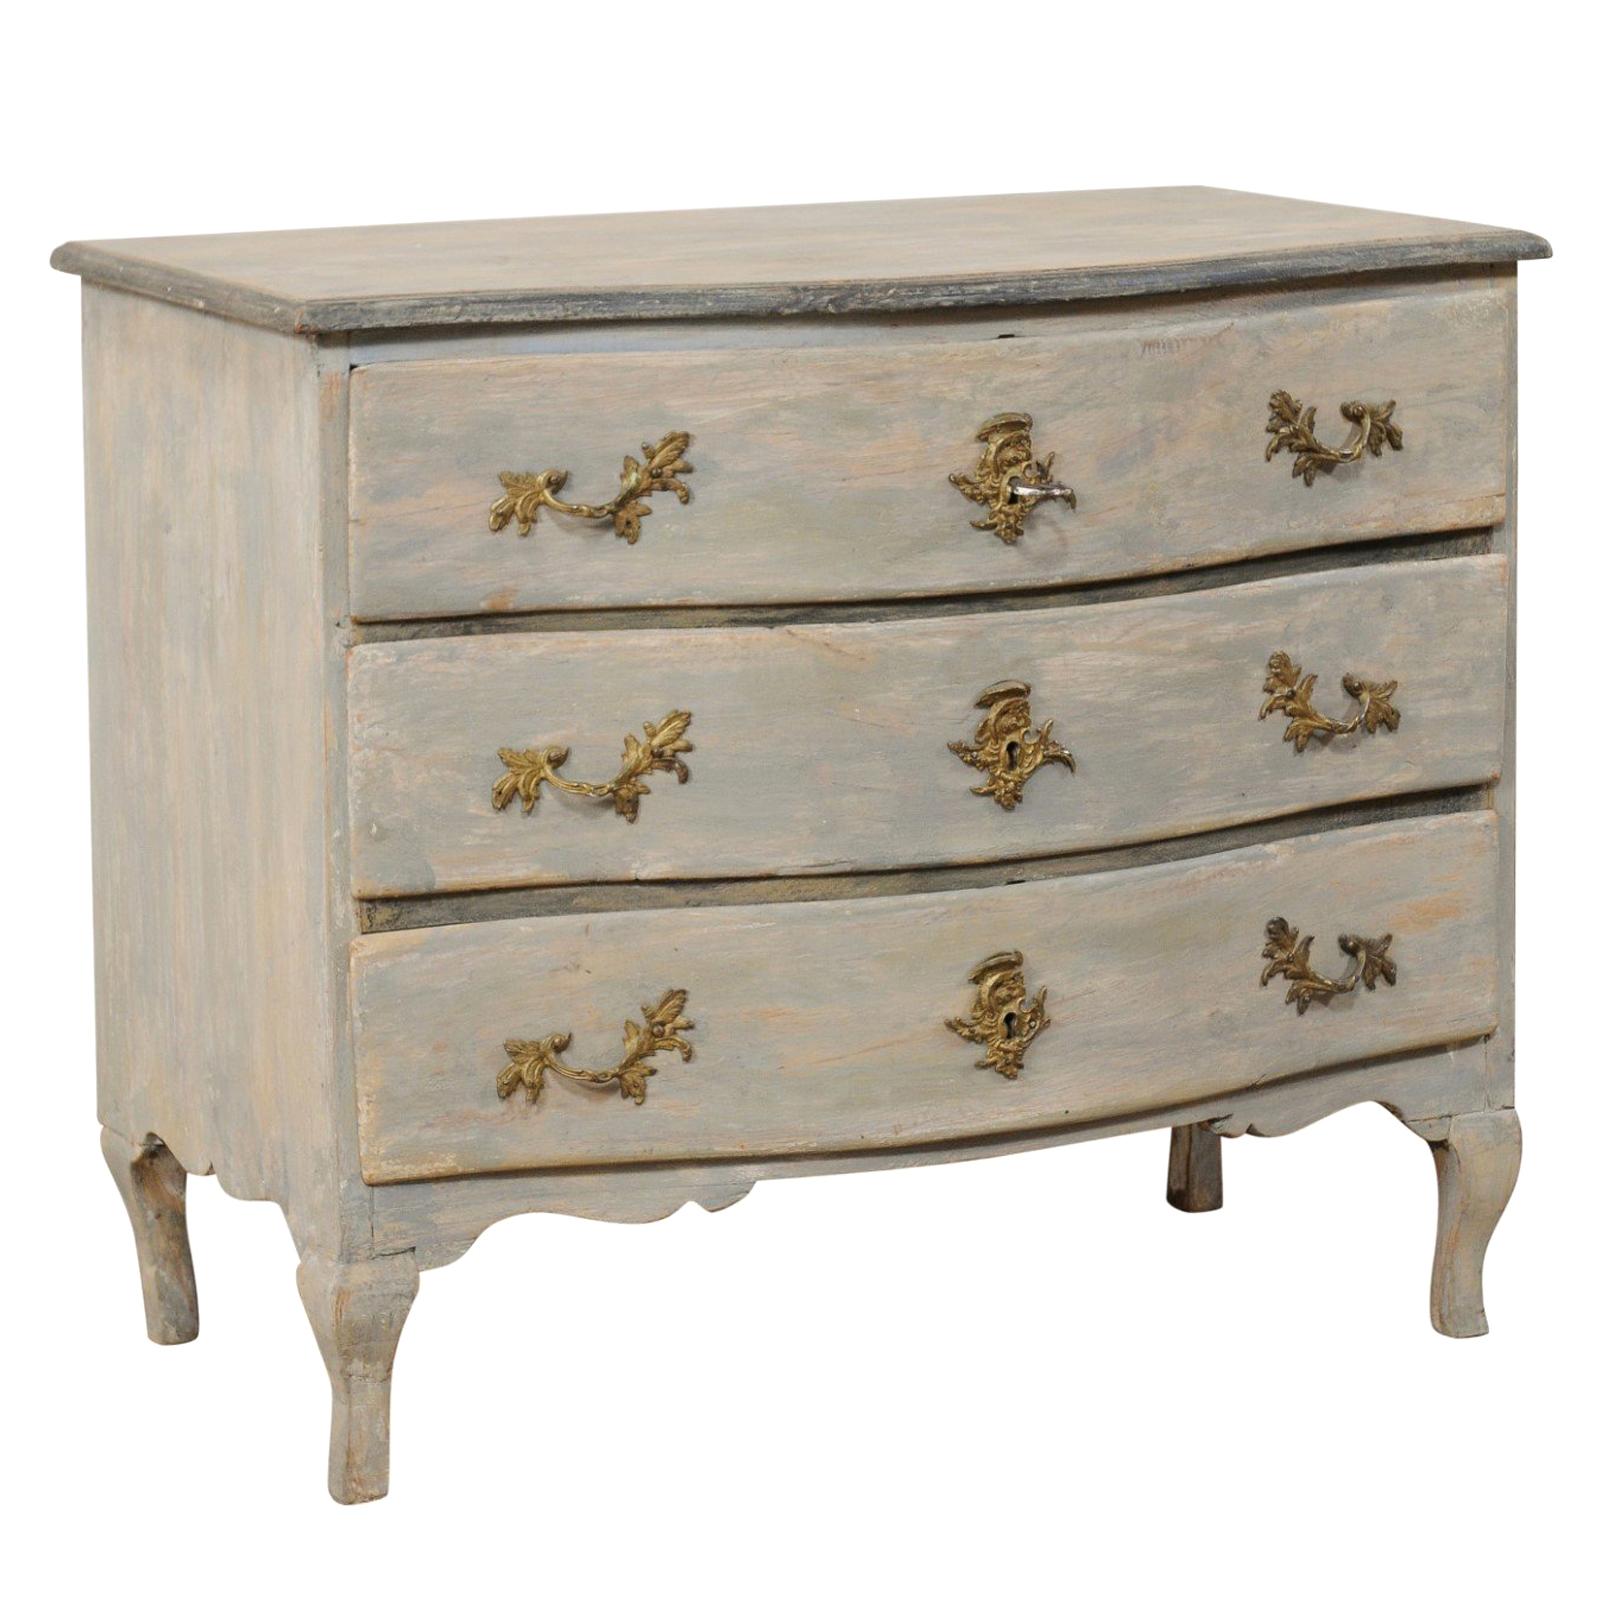 An 18th Century Swedish Period Rococo Chest of Drawers with Serpentine Body